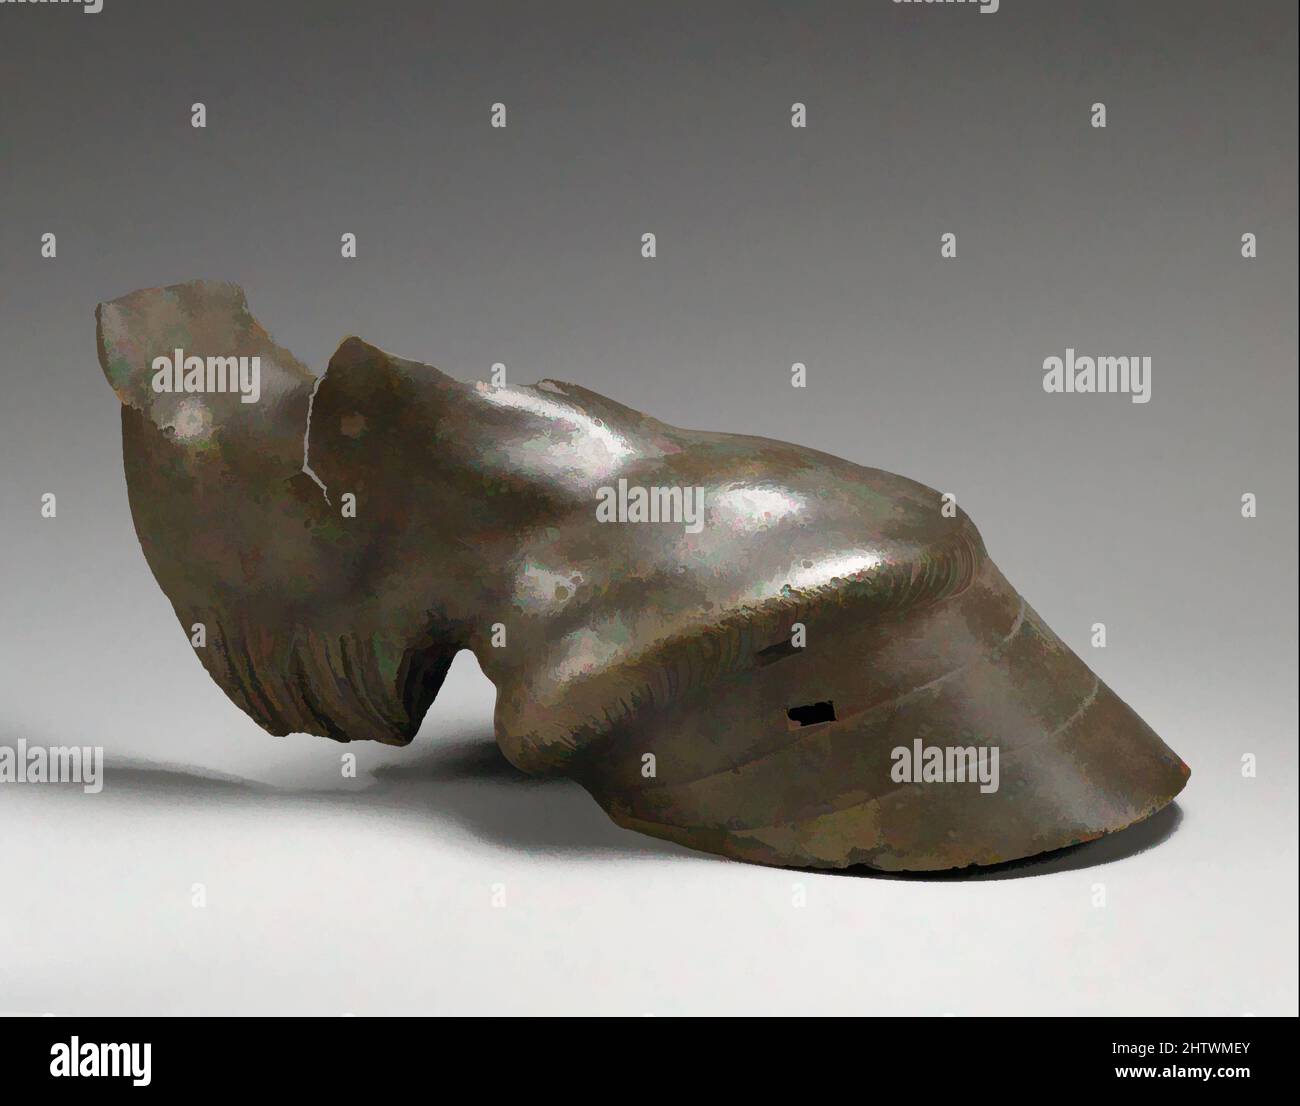 Art inspired by Bronze hoof of a horse, Imperial, 1st–2nd century A.D., tRoman, Bronze, Other: 11 in. (27.9 cm), Bronzes, The hoof is from a hind leg, Classic works modernized by Artotop with a splash of modernity. Shapes, color and value, eye-catching visual impact on art. Emotions through freedom of artworks in a contemporary way. A timeless message pursuing a wildly creative new direction. Artists turning to the digital medium and creating the Artotop NFT Stock Photo